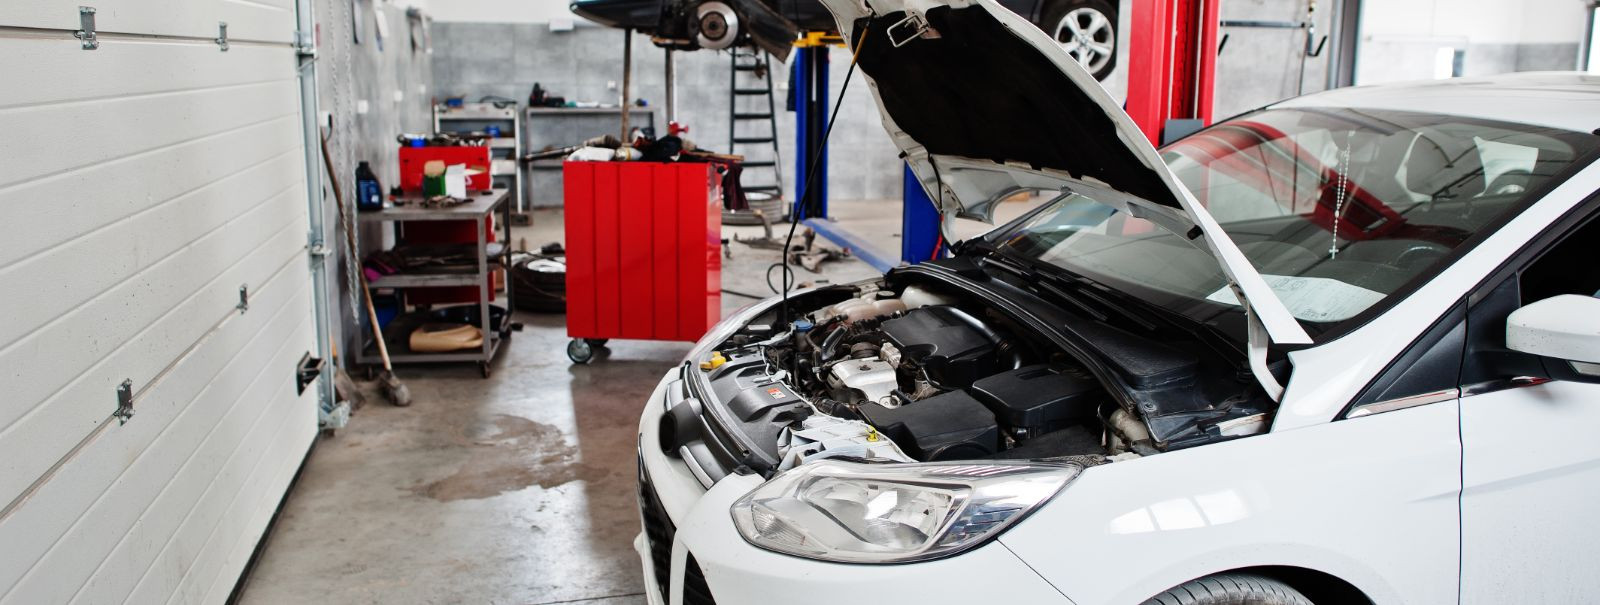 Maintaining your vehicle is not just about keeping it running; it's about maximizing its performance, ensuring safety, and extending its lifespan. Regular maint